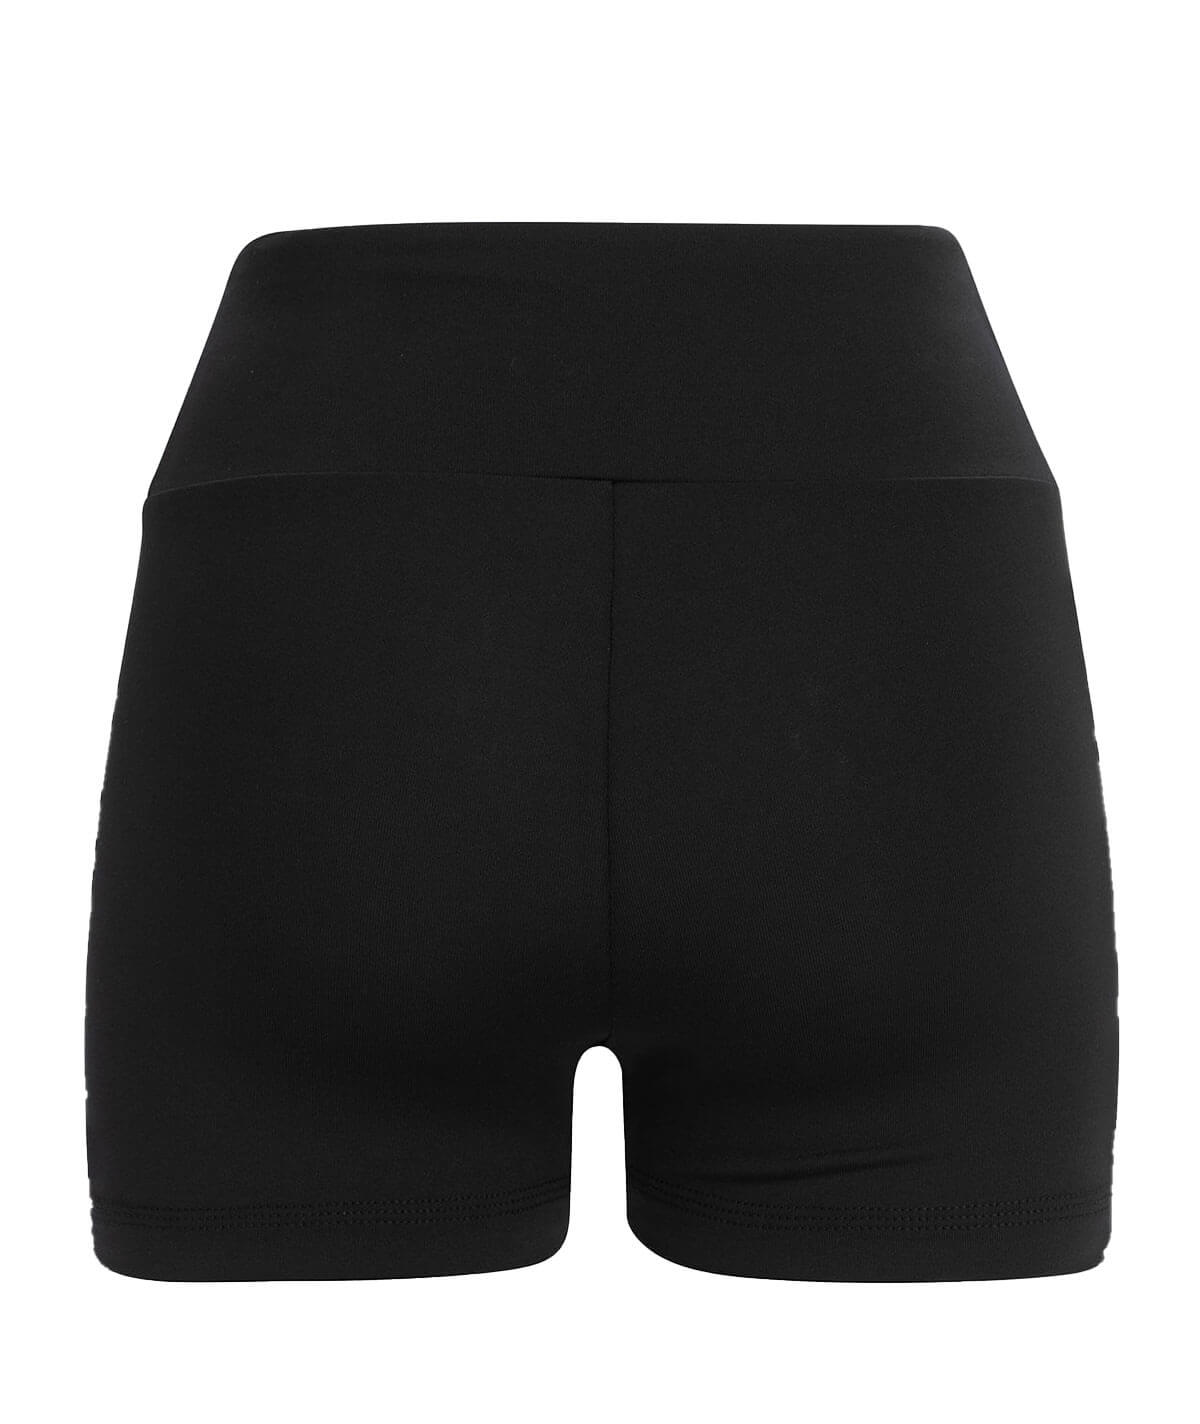 GK All Star High-Waisted Fitted Shorts